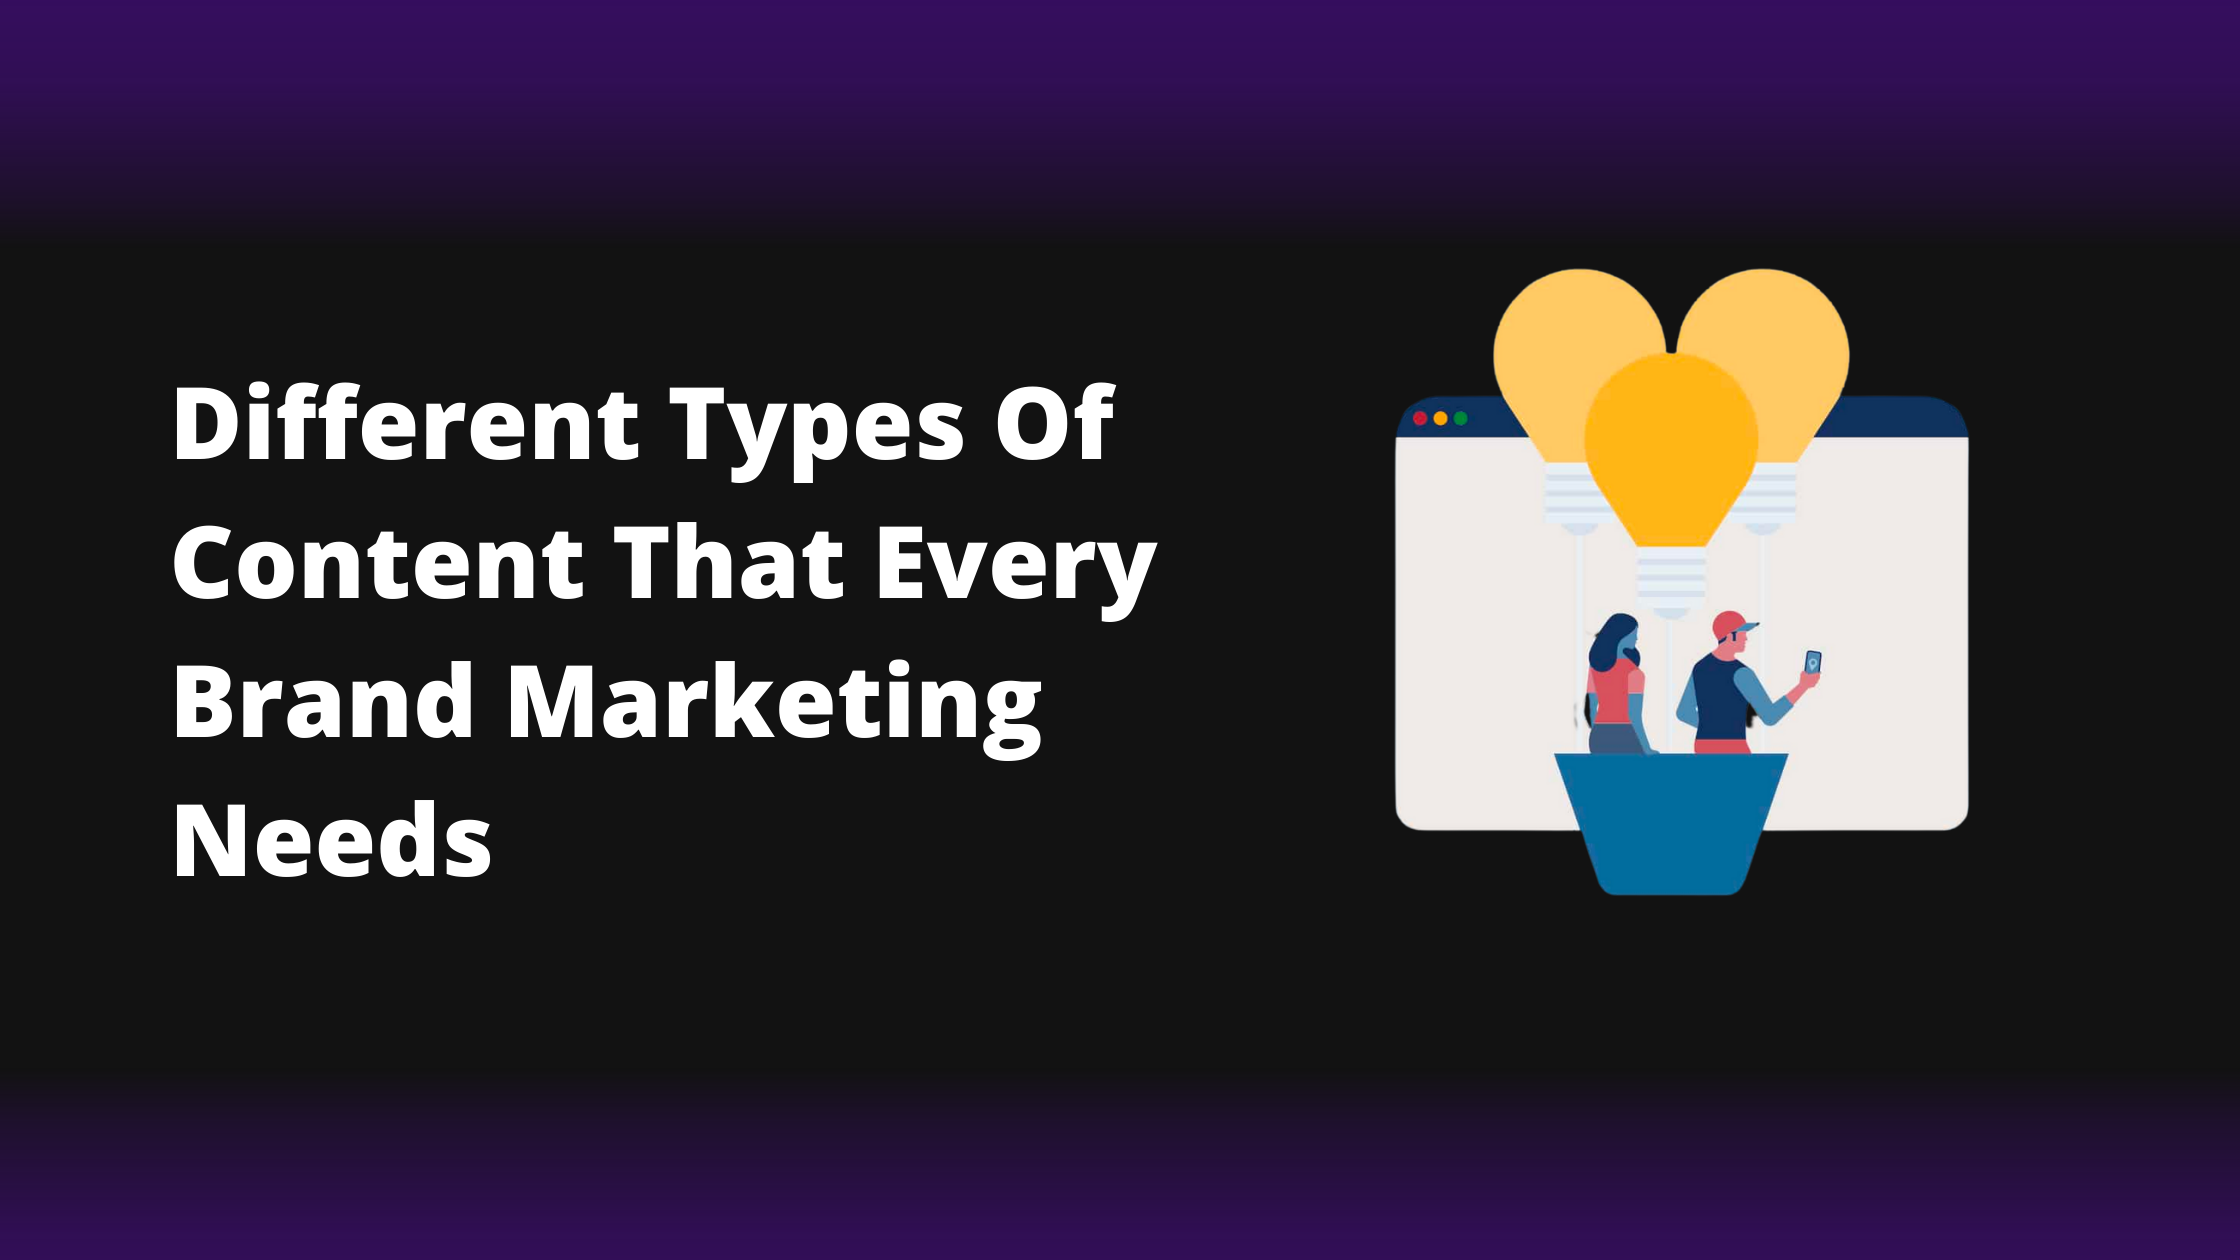 Different types of content that every brand marketing needs